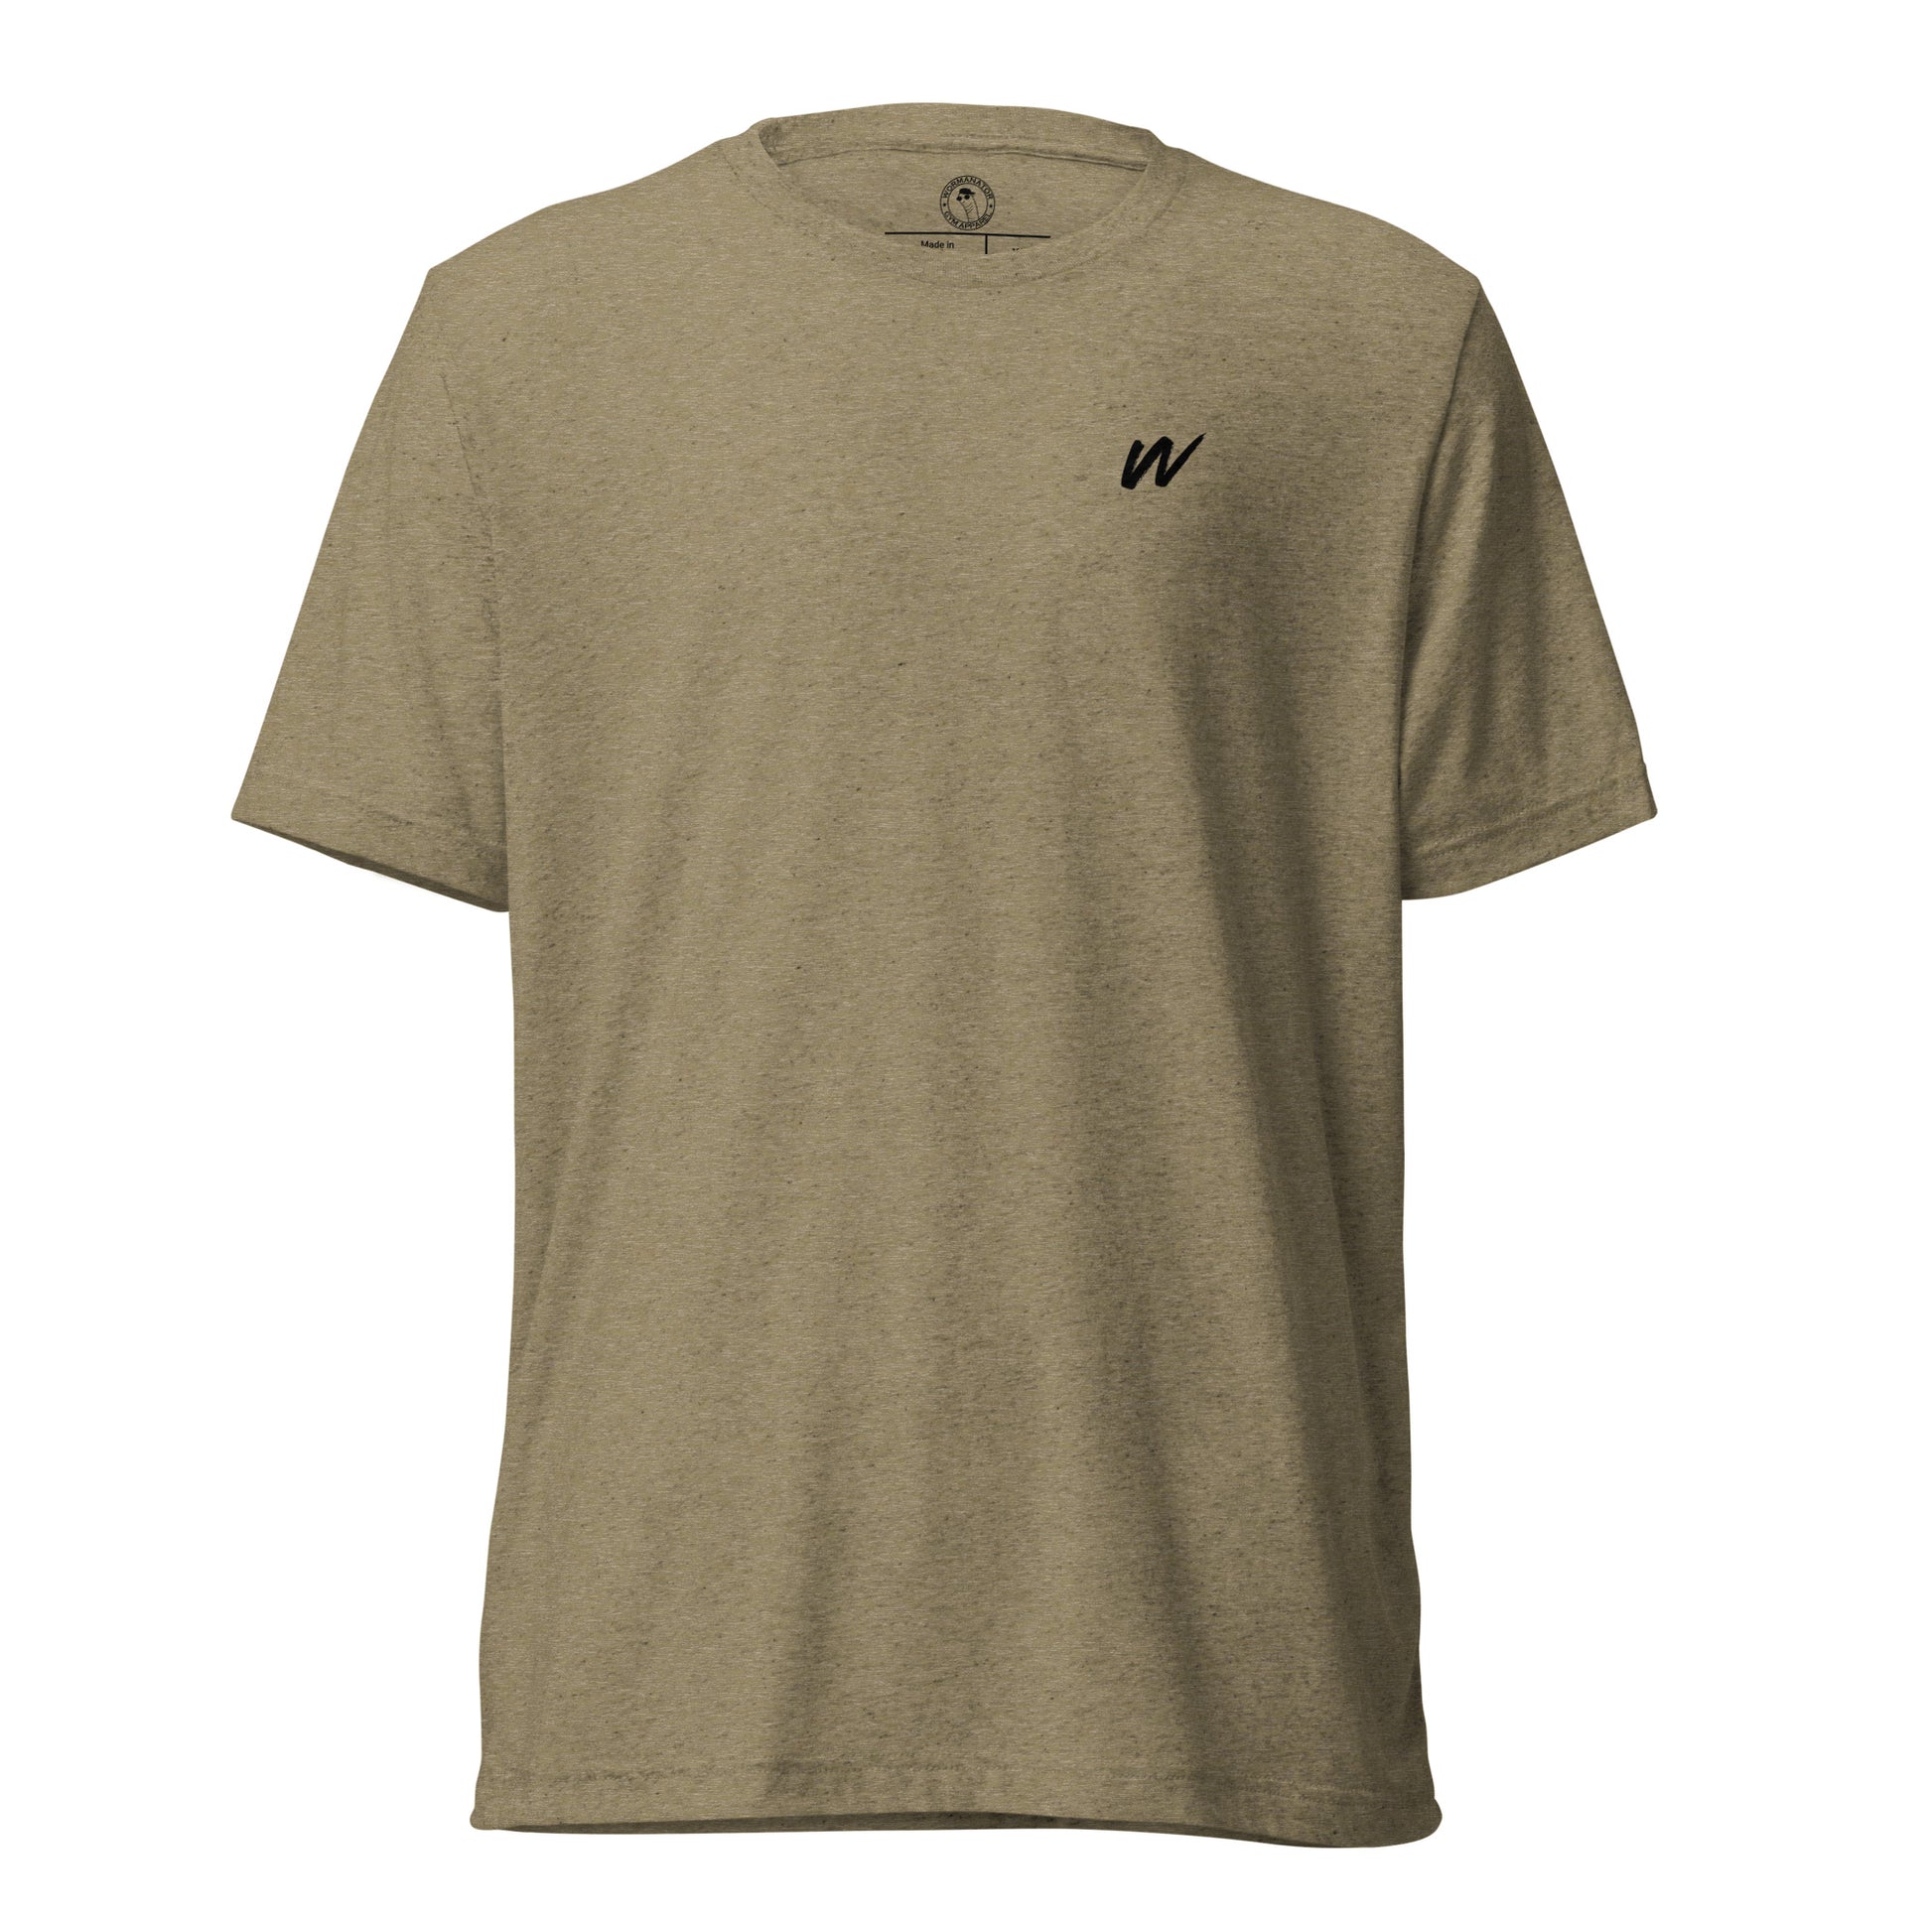 Win the Day T-Shirt in Olive Triblend